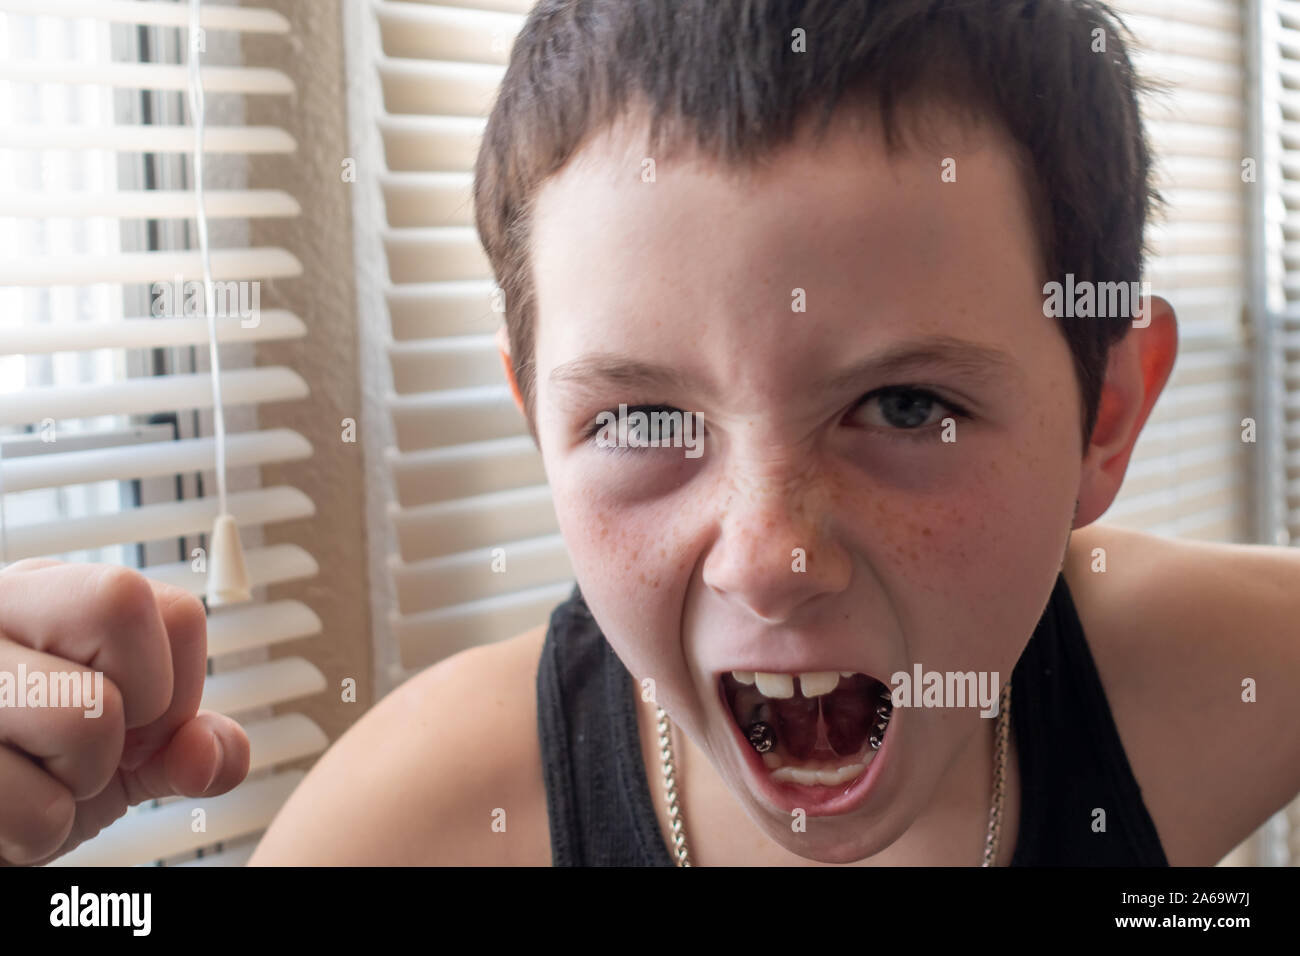 Agressive young boy venting anger with a closed fist. Stock Photo